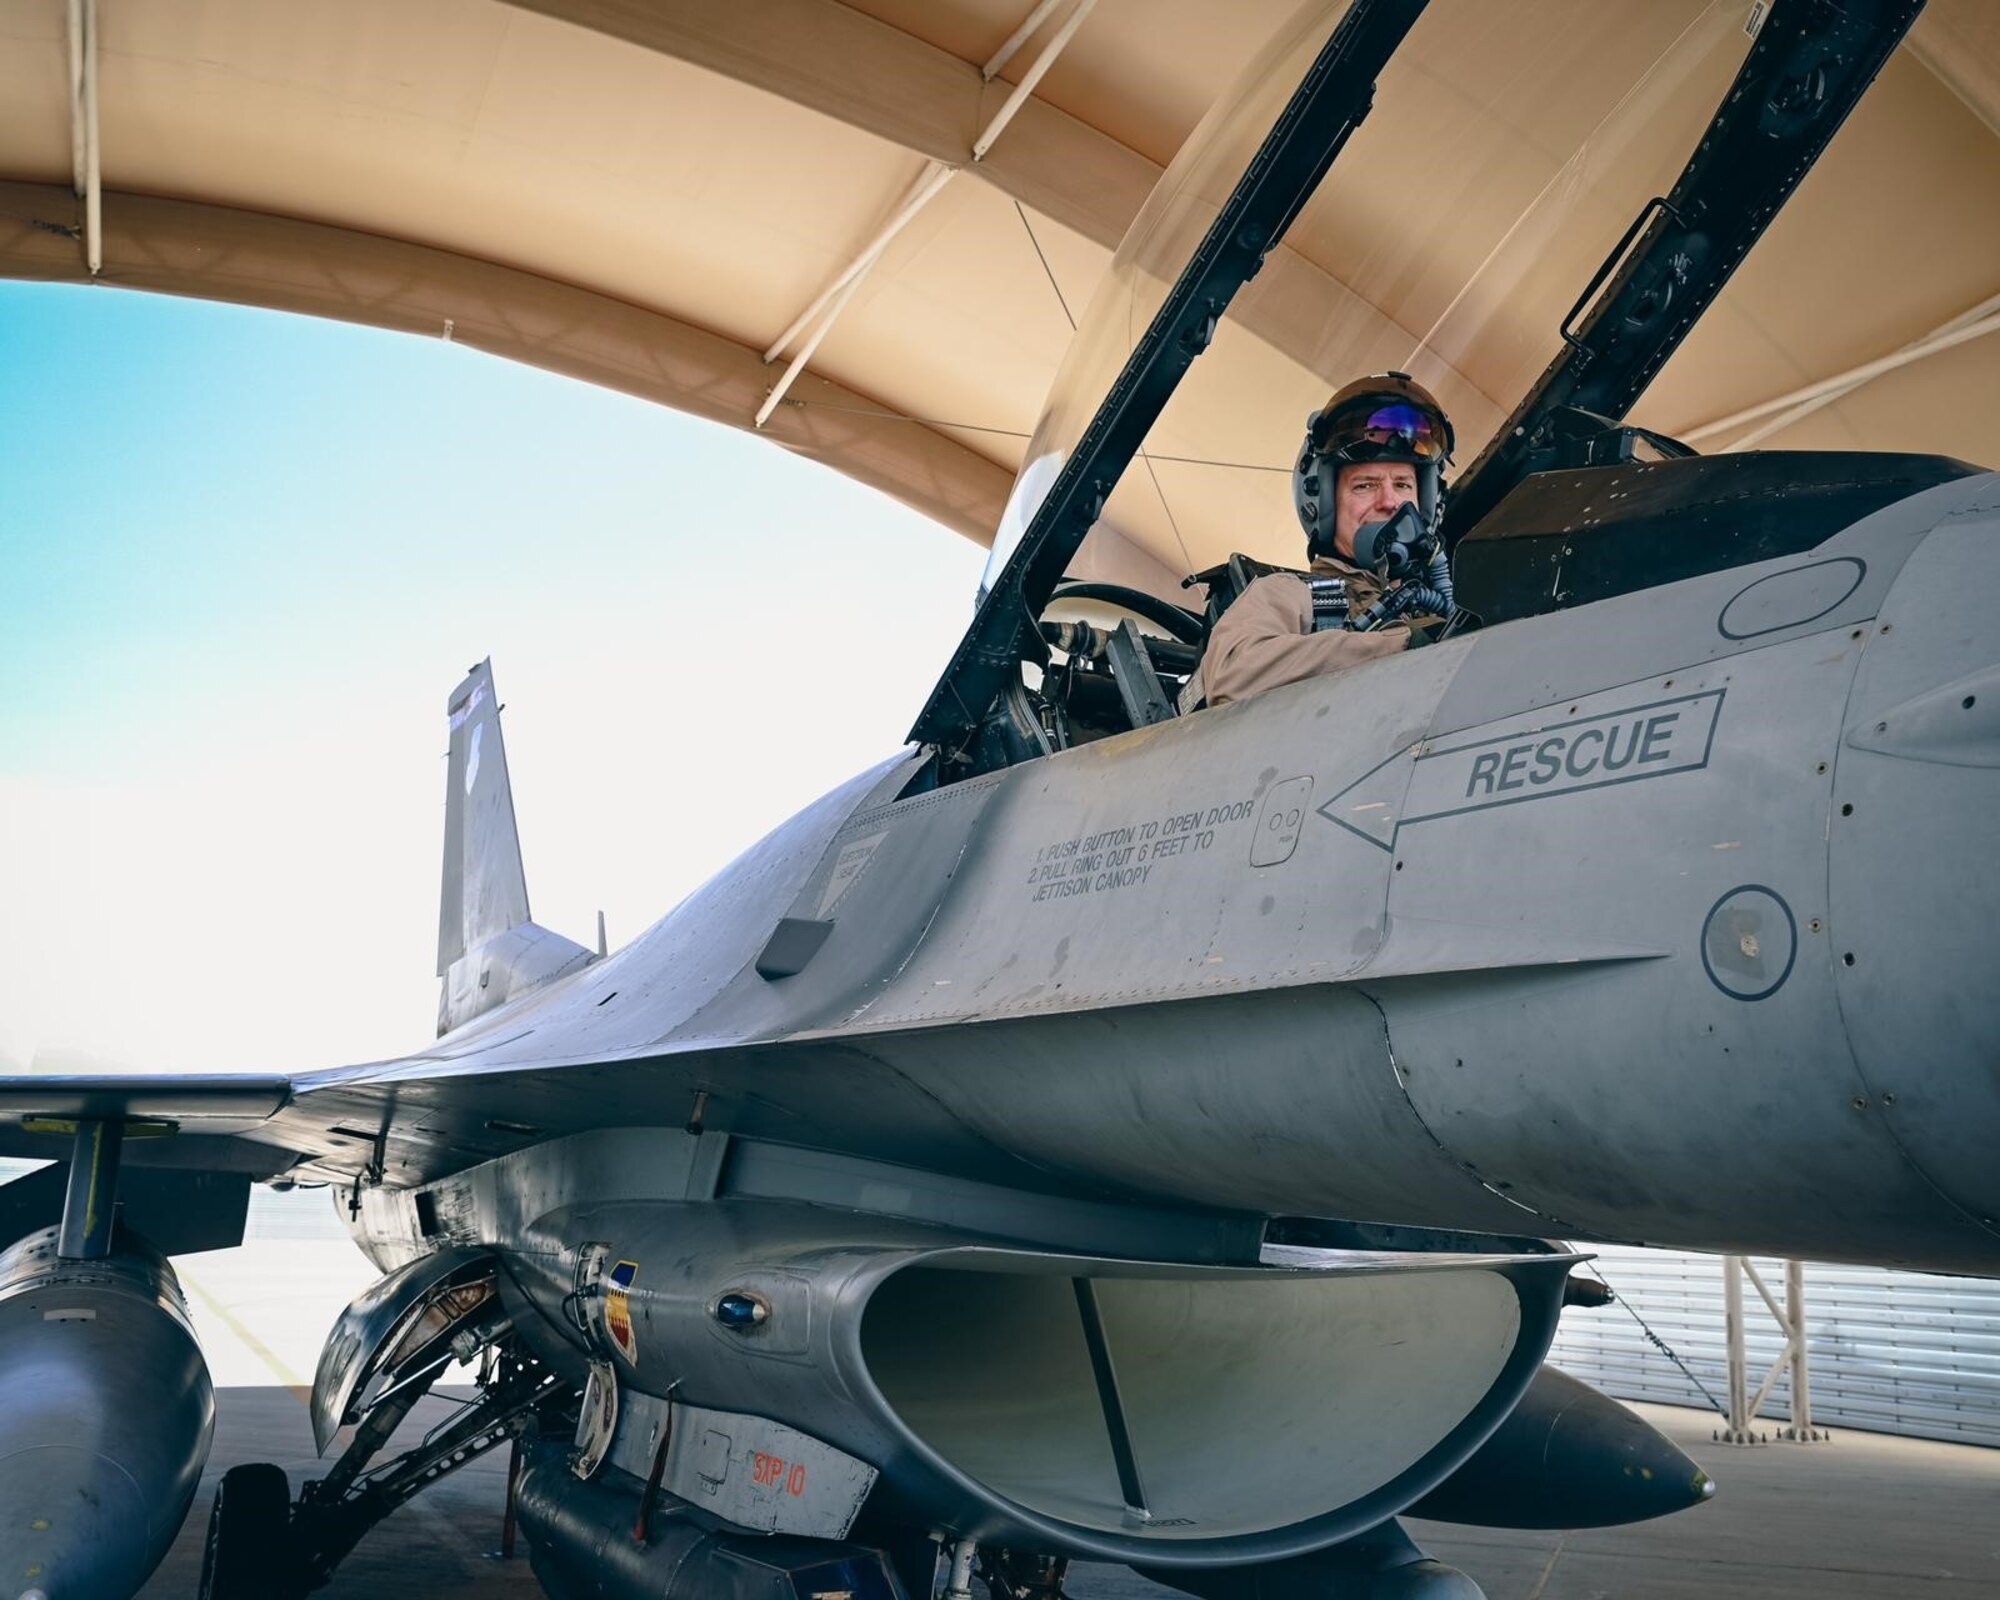 U.S. Air Force Lt. Gen. Alexus Grynkewich, 9th Air Force (Air Forces Central) commander, prepares for flight at Prince Sultan Air Base, Kingdom of Saudi Arabia, Apr. 4, 2023. During the mission, the general flew over airspace in Syria, in support of Operation Inherent Resolve and the Coalition service members deployed in the region who work with Syrian Democratic Forces to battle the Islamic State in Iraq and Syria. Since the beginning of March, Russian aircraft have violated deconfliction protocols, which were established between the Coalition and Russia to avoid miscalculations and potentially dangerous encounters in the airspace in 2019, 63 times. (U.S. Air Force photo by Staff Sgt. Micah Coate)